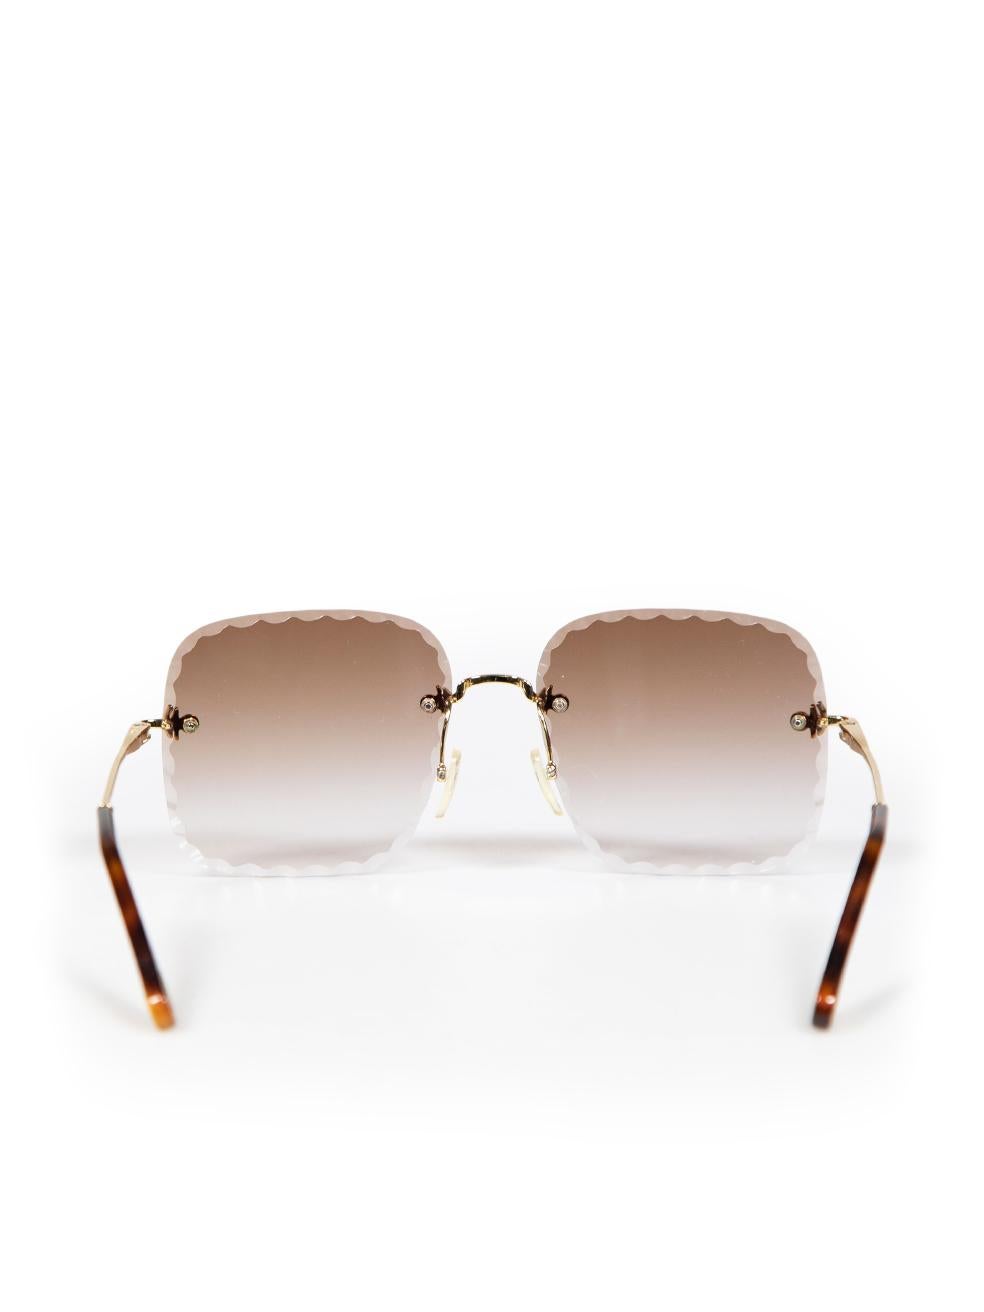 Chloé Brown Rimless Scalloped Square Sunglasses In Excellent Condition For Sale In London, GB